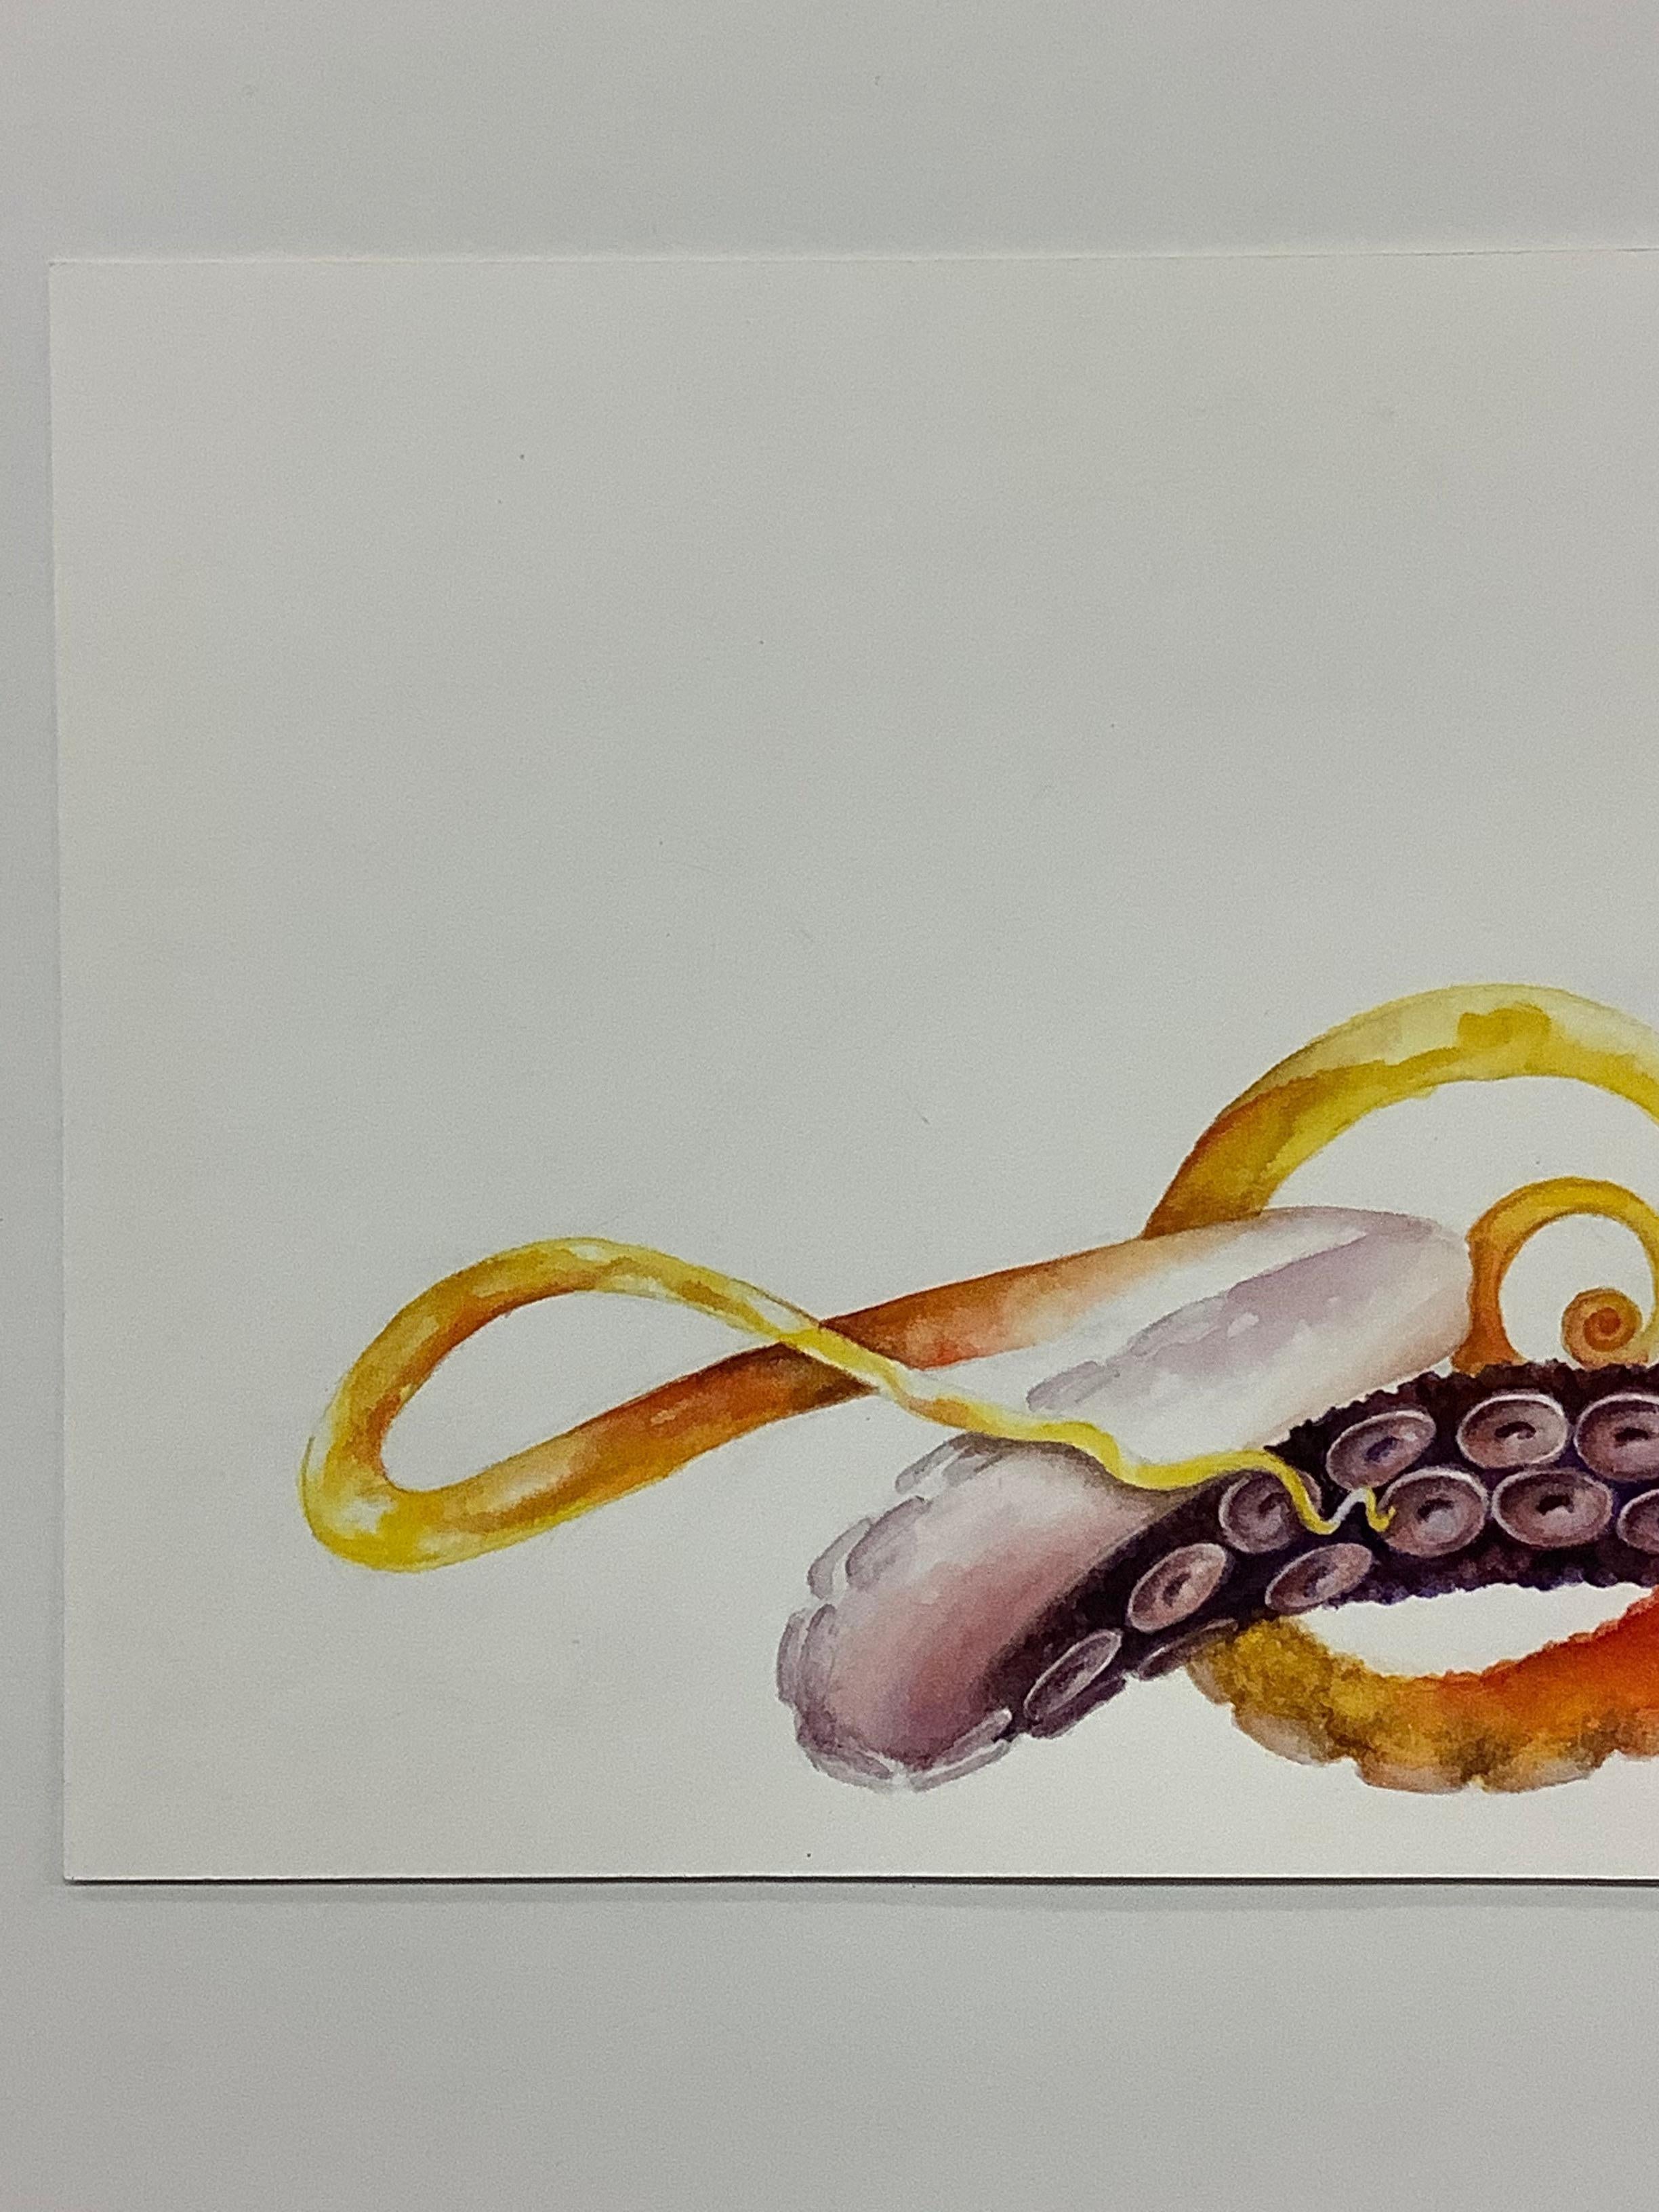 A red and orange octopus encircles a perfume bottle in this small horizontal painting in watercolor and colored pencil on paper. This work on paper is unframed. 

Francine Fox works in many mediums including oil paint, watercolor, gouache, graphite